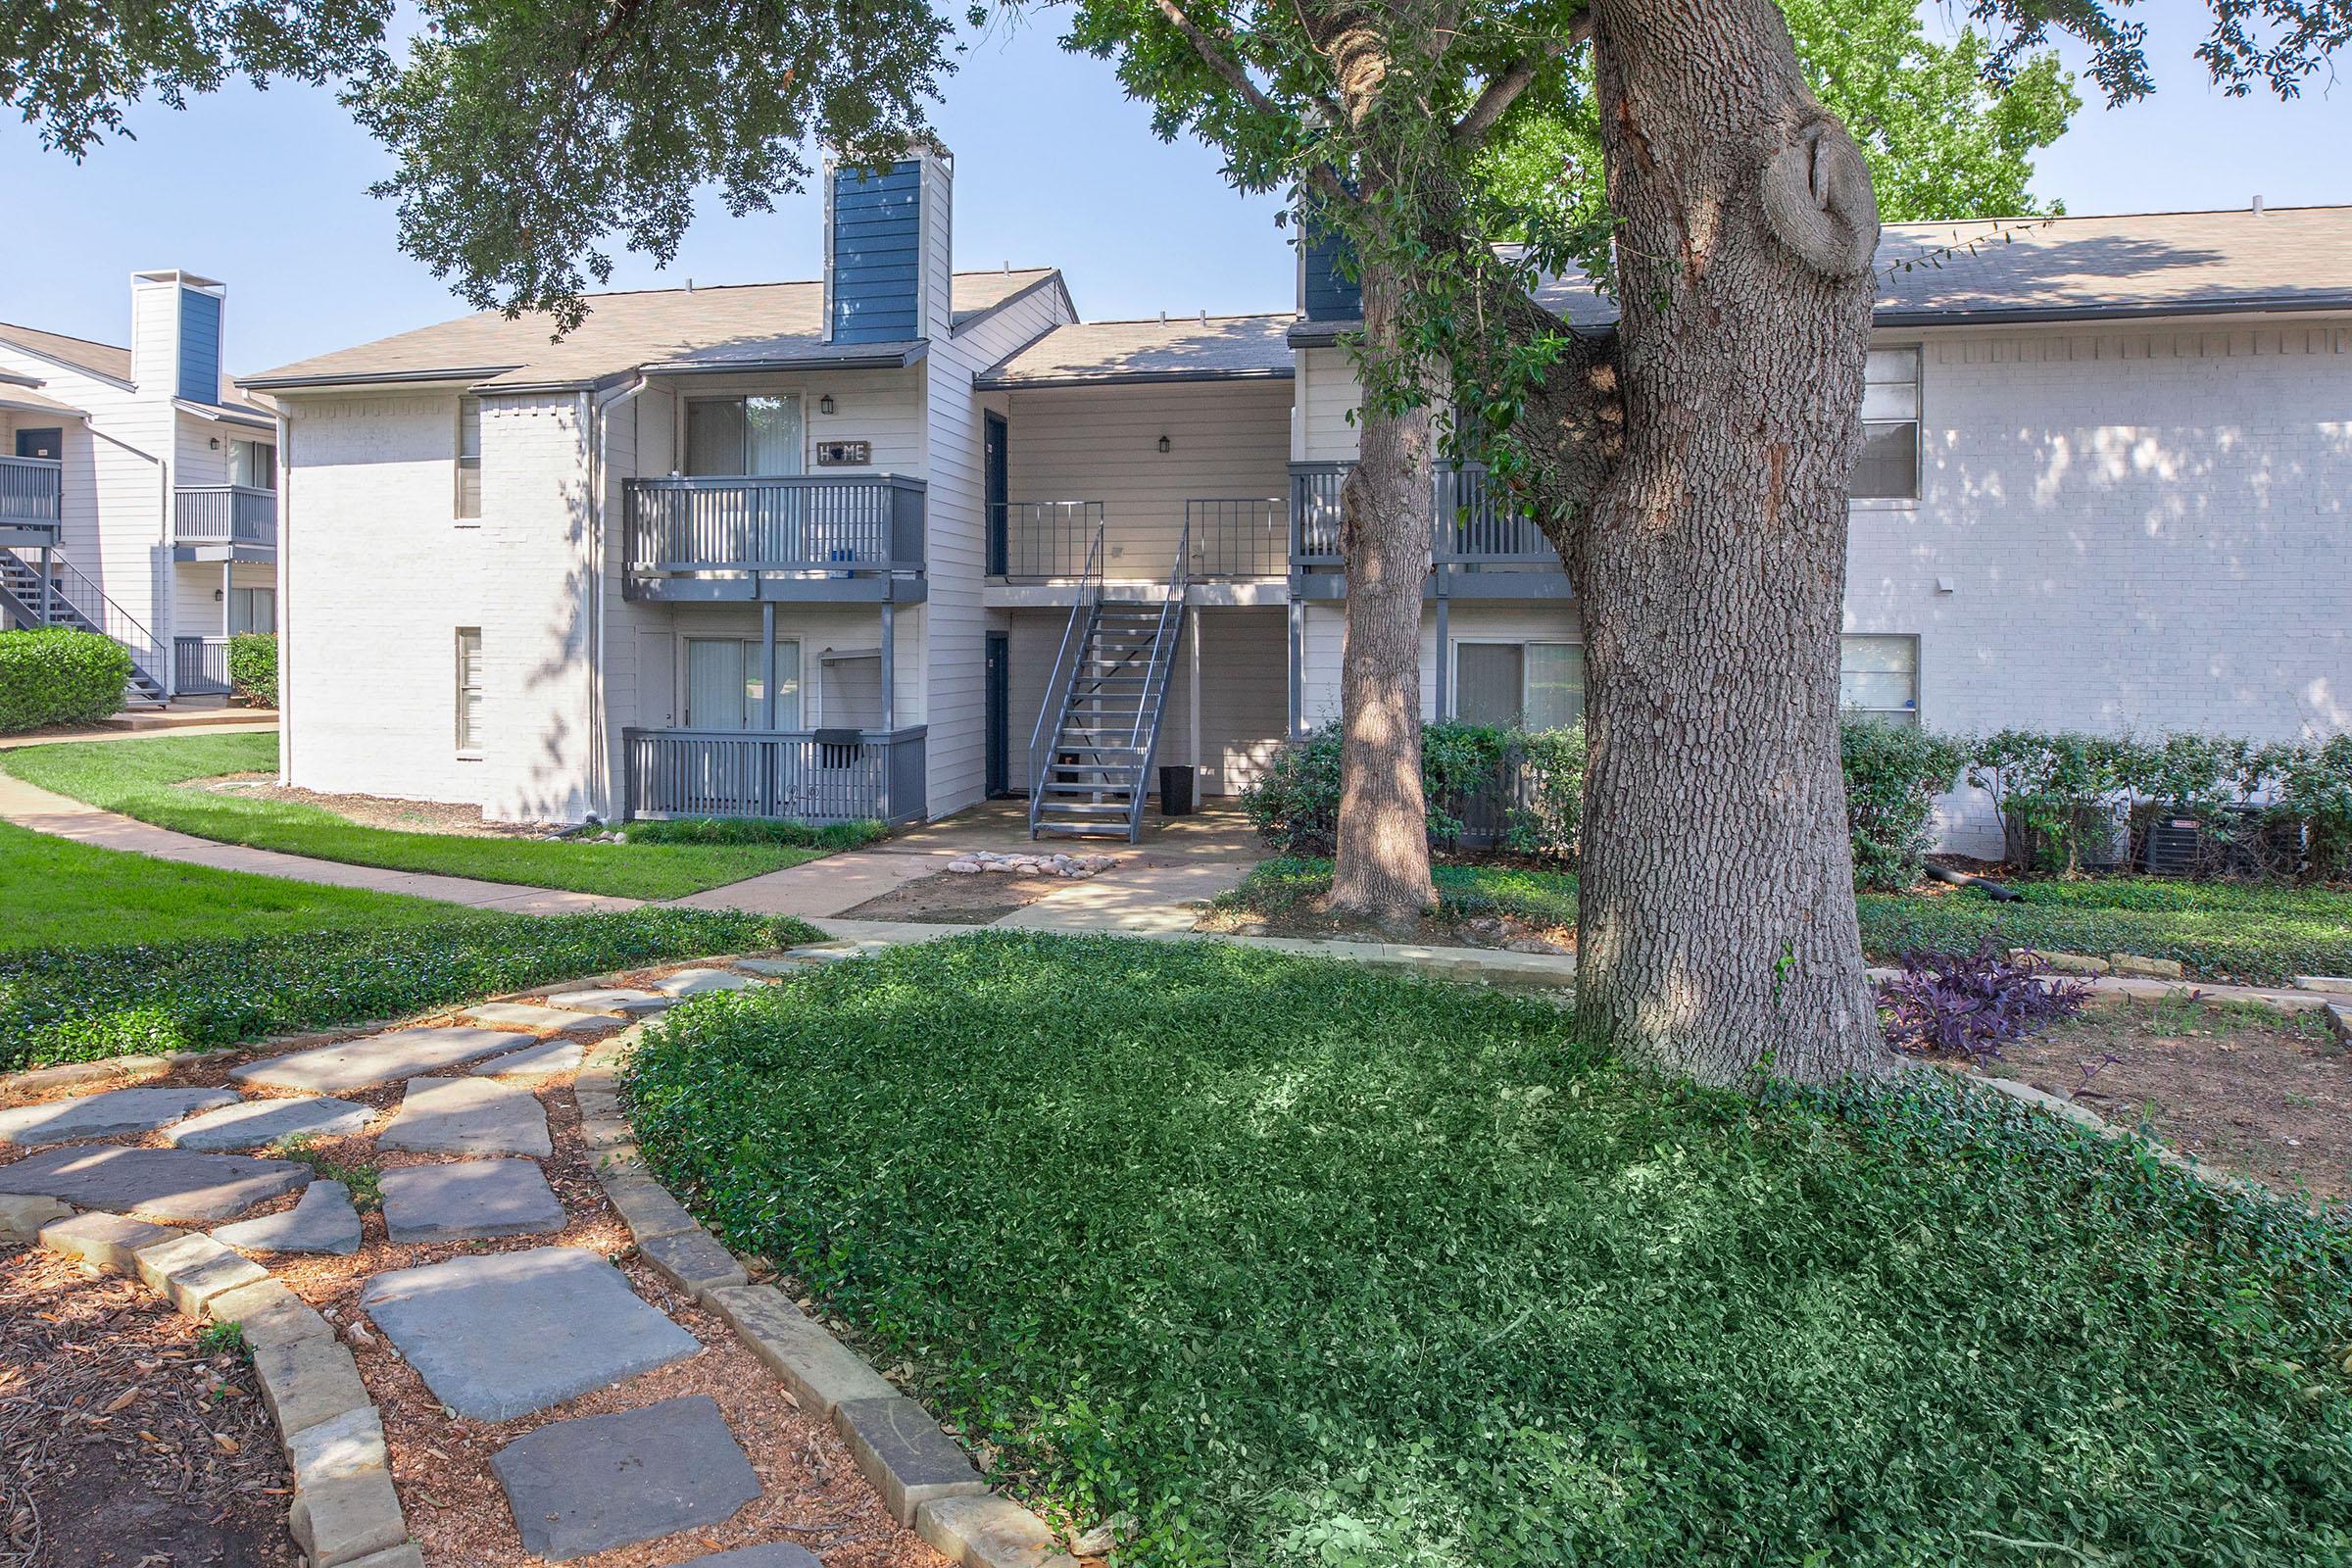 The courtyard with landscaping and trees surrounded by the apartments at Rise North Arlington.